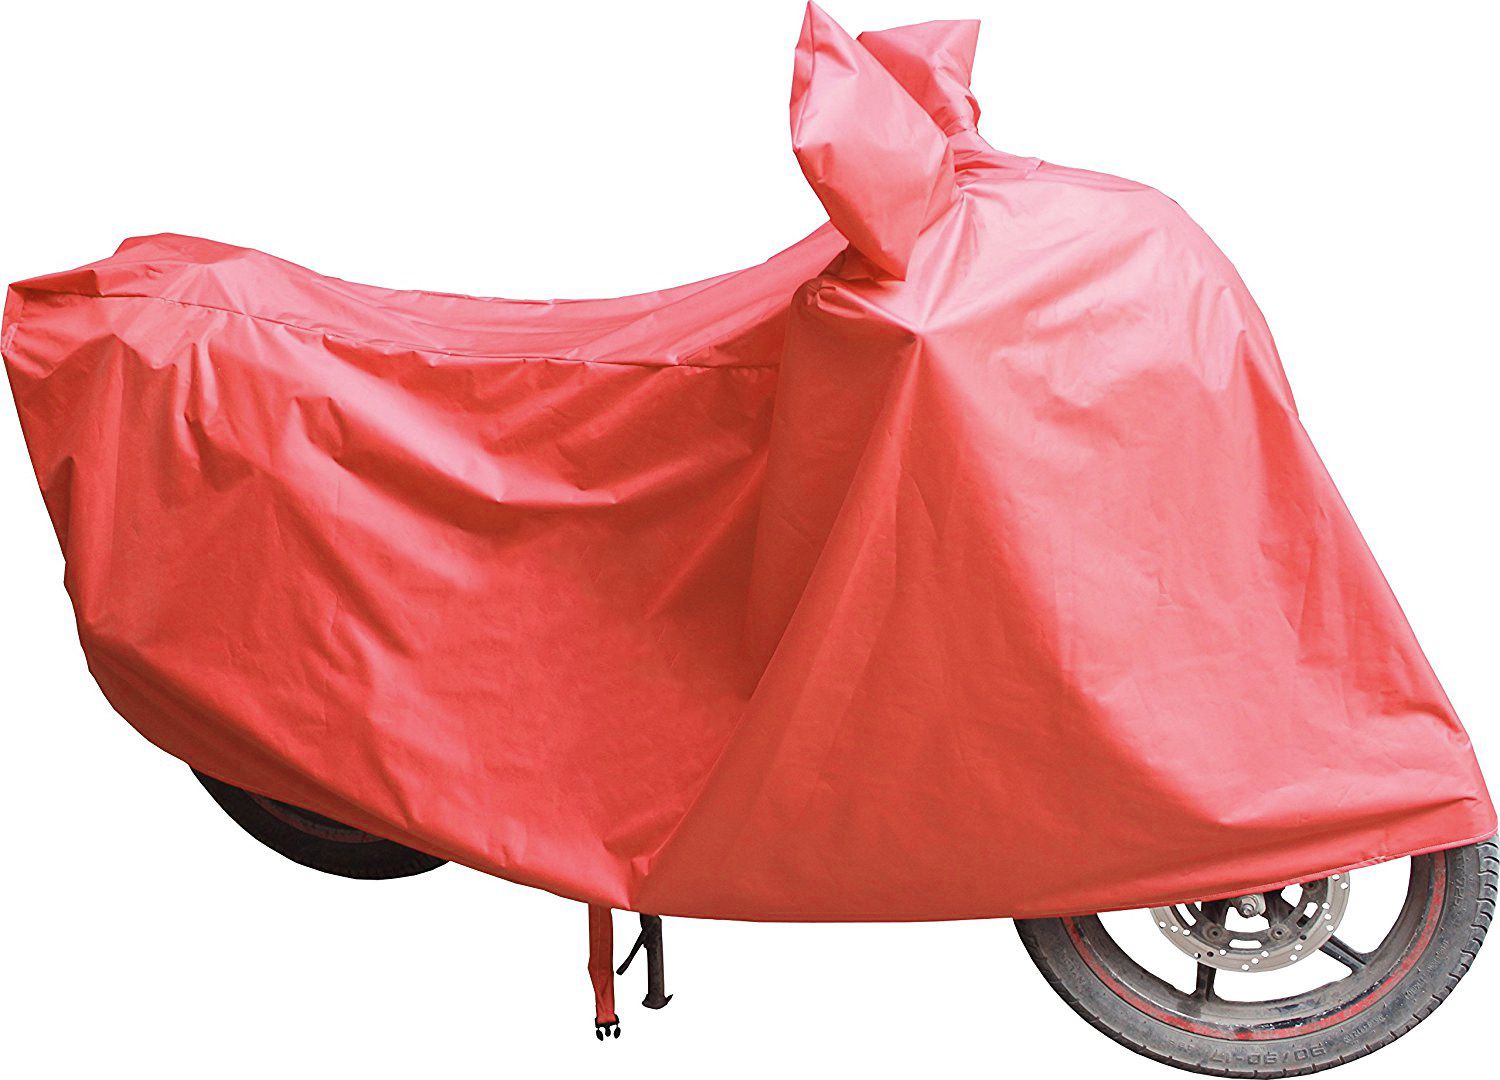 A Waterproof Hero Glamour I3s Bike Cover Red Buy A Waterproof Hero Glamour I3s Bike Cover Red Online At Low Price In India On Snapdeal